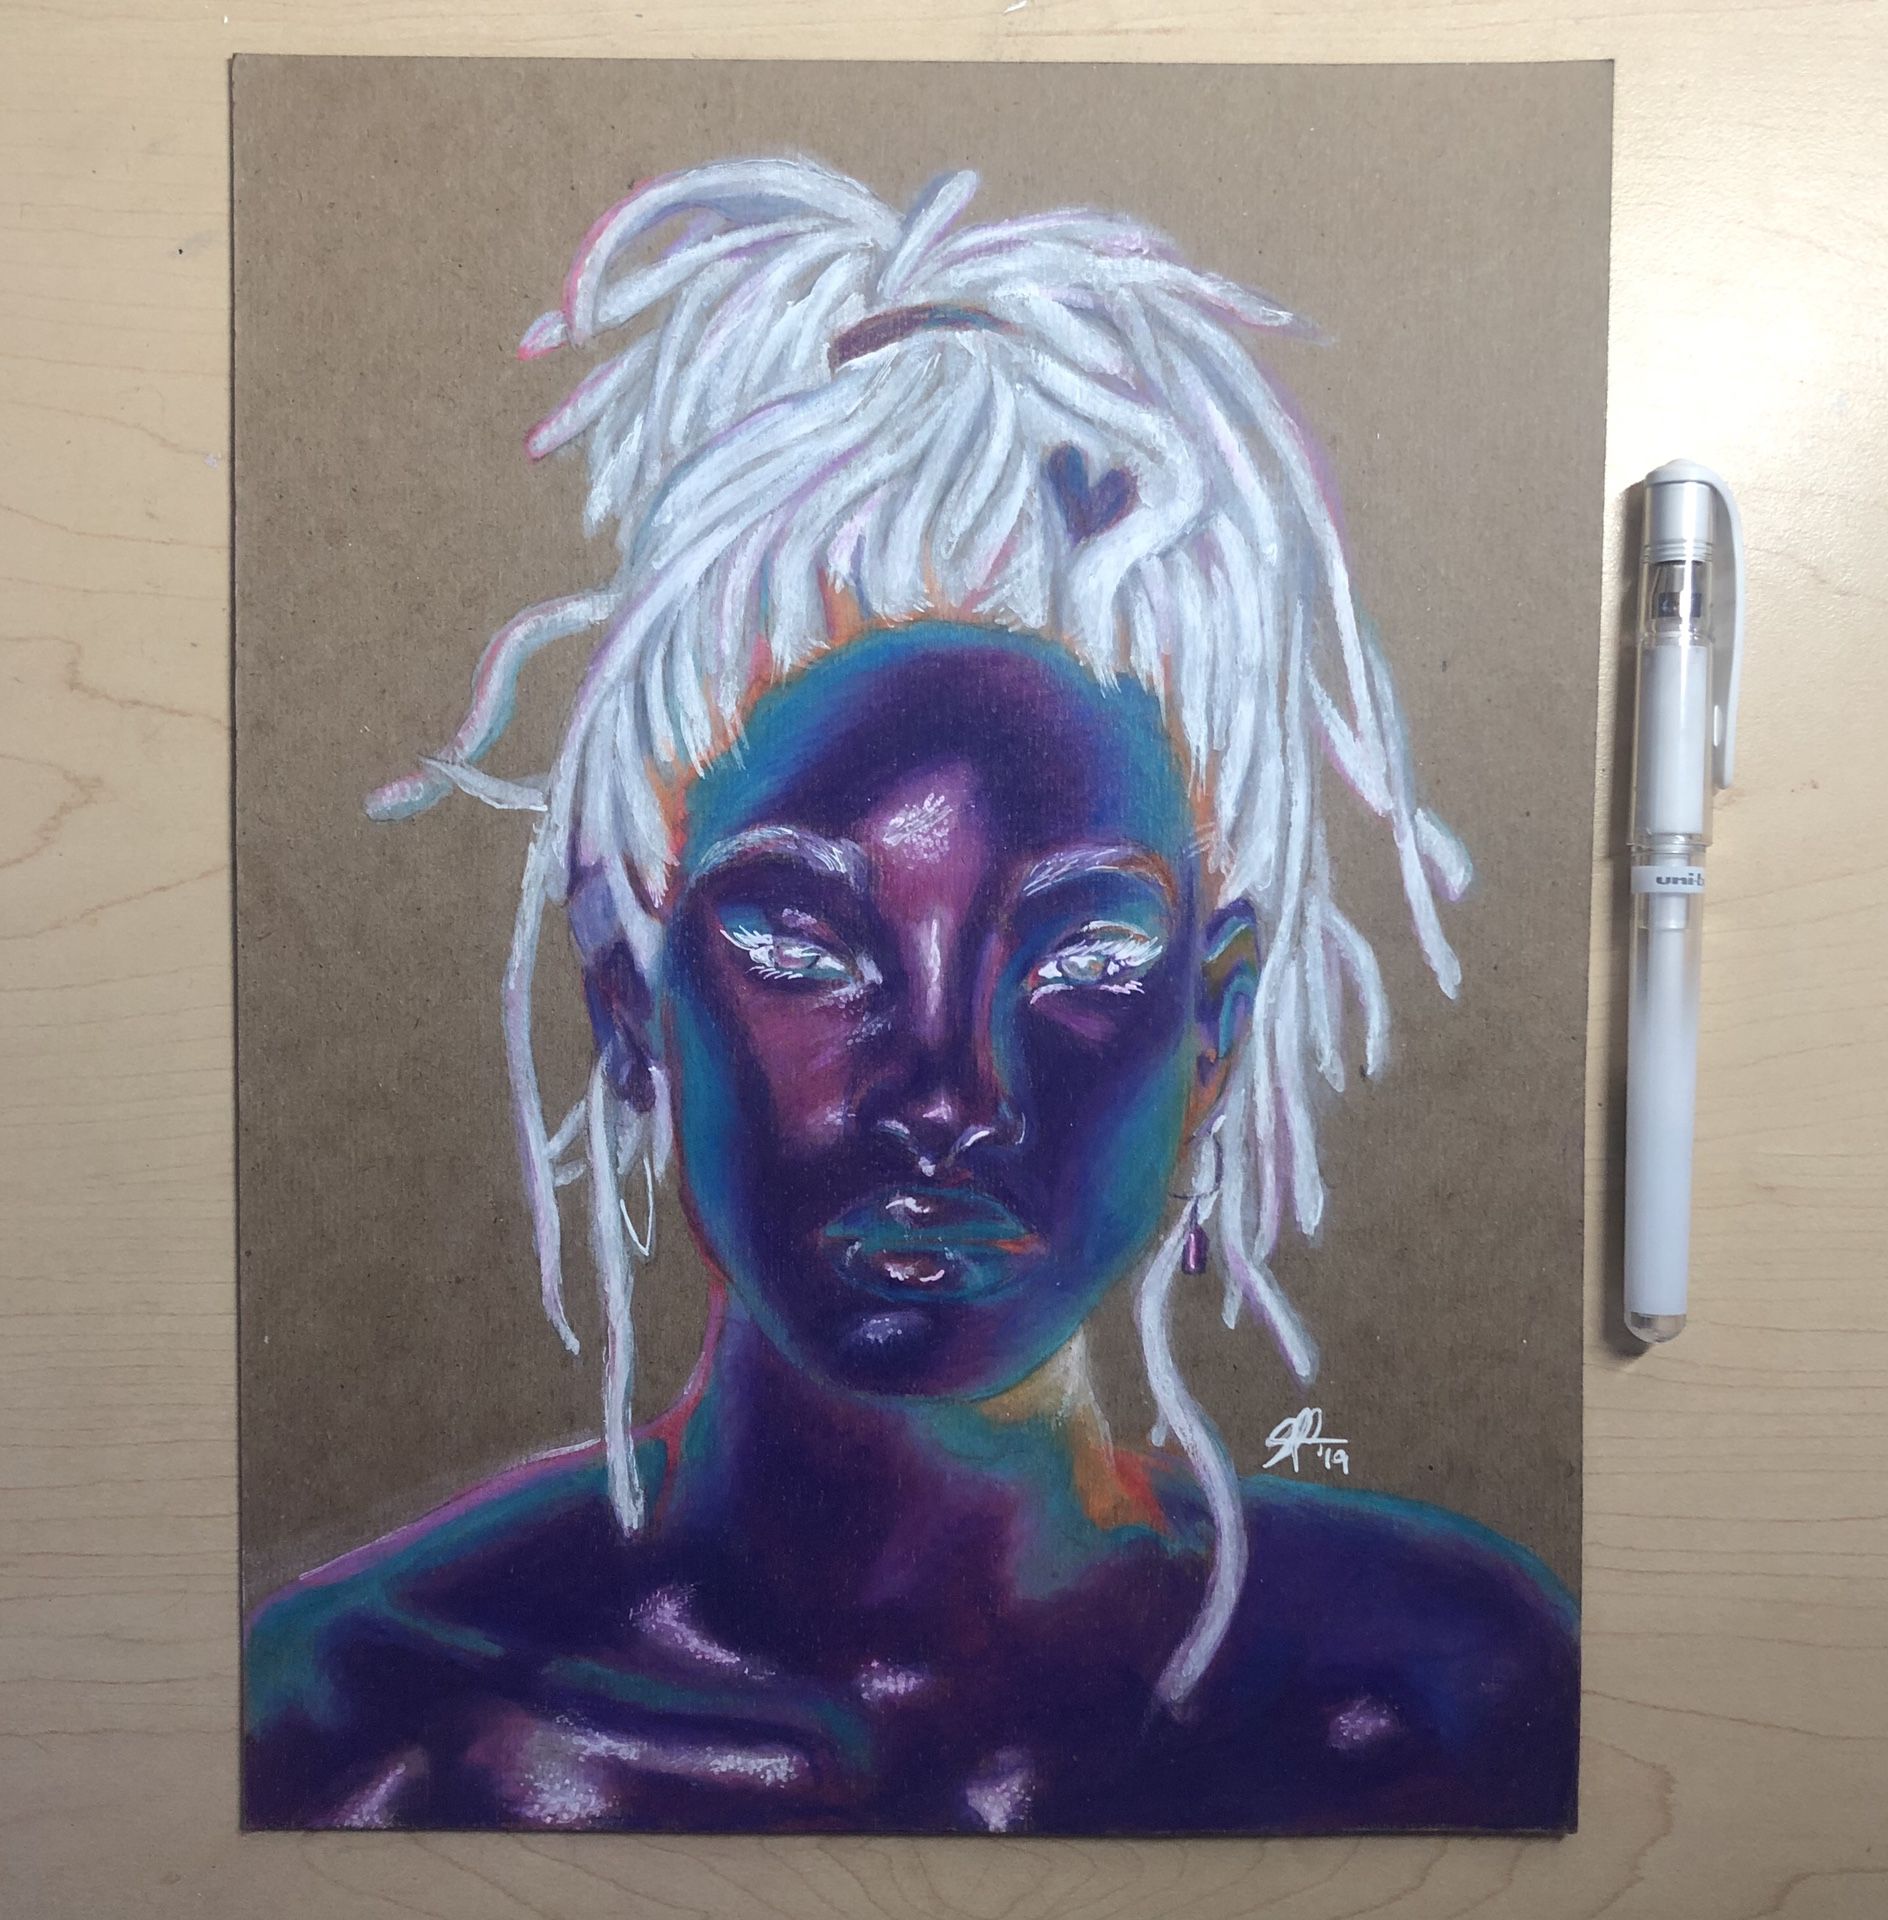 Willow smith drawing 11x8.5